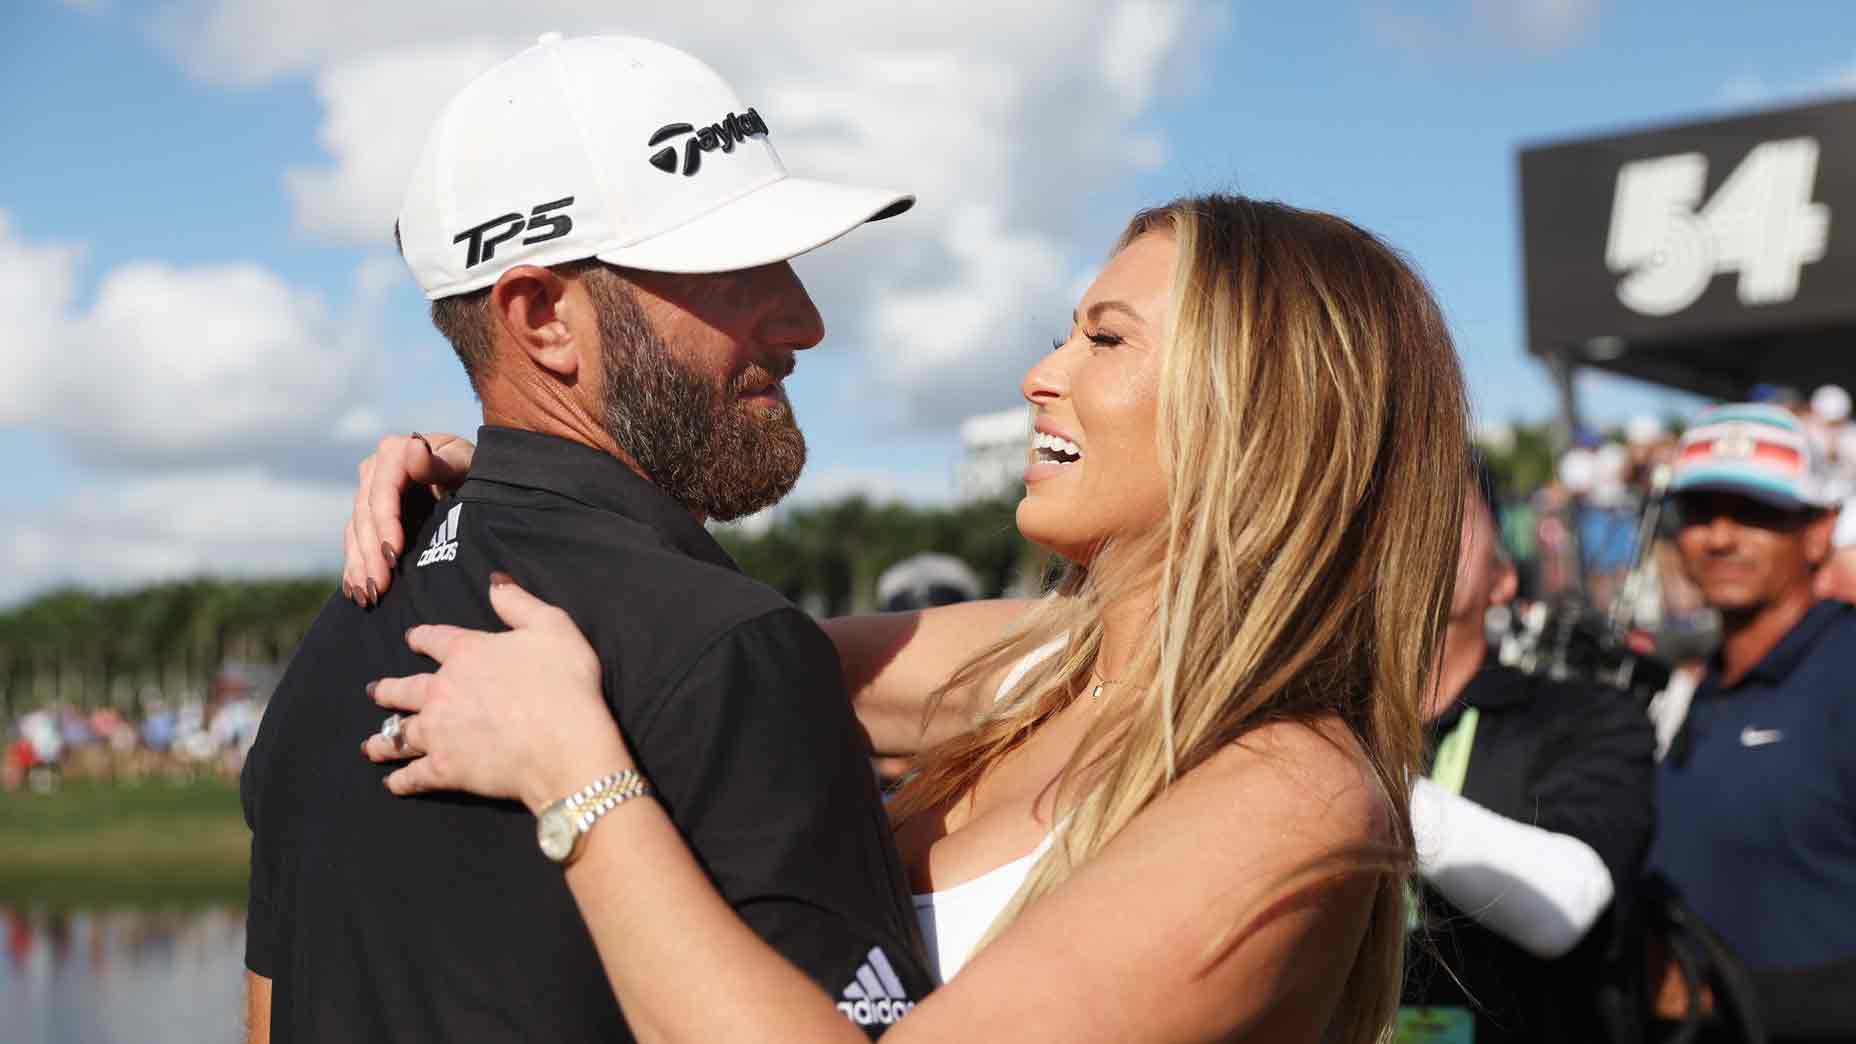 Team Captain Dustin Johnson of 4 Aces GC and wife Paulina Gretzky celebrate the 4 Aces GC team win on the 18th green during the team championship stroke-play round of the LIV Golf Invitational - Miami at Trump National Doral Miami on October 30, 2022 in Doral, Florida.